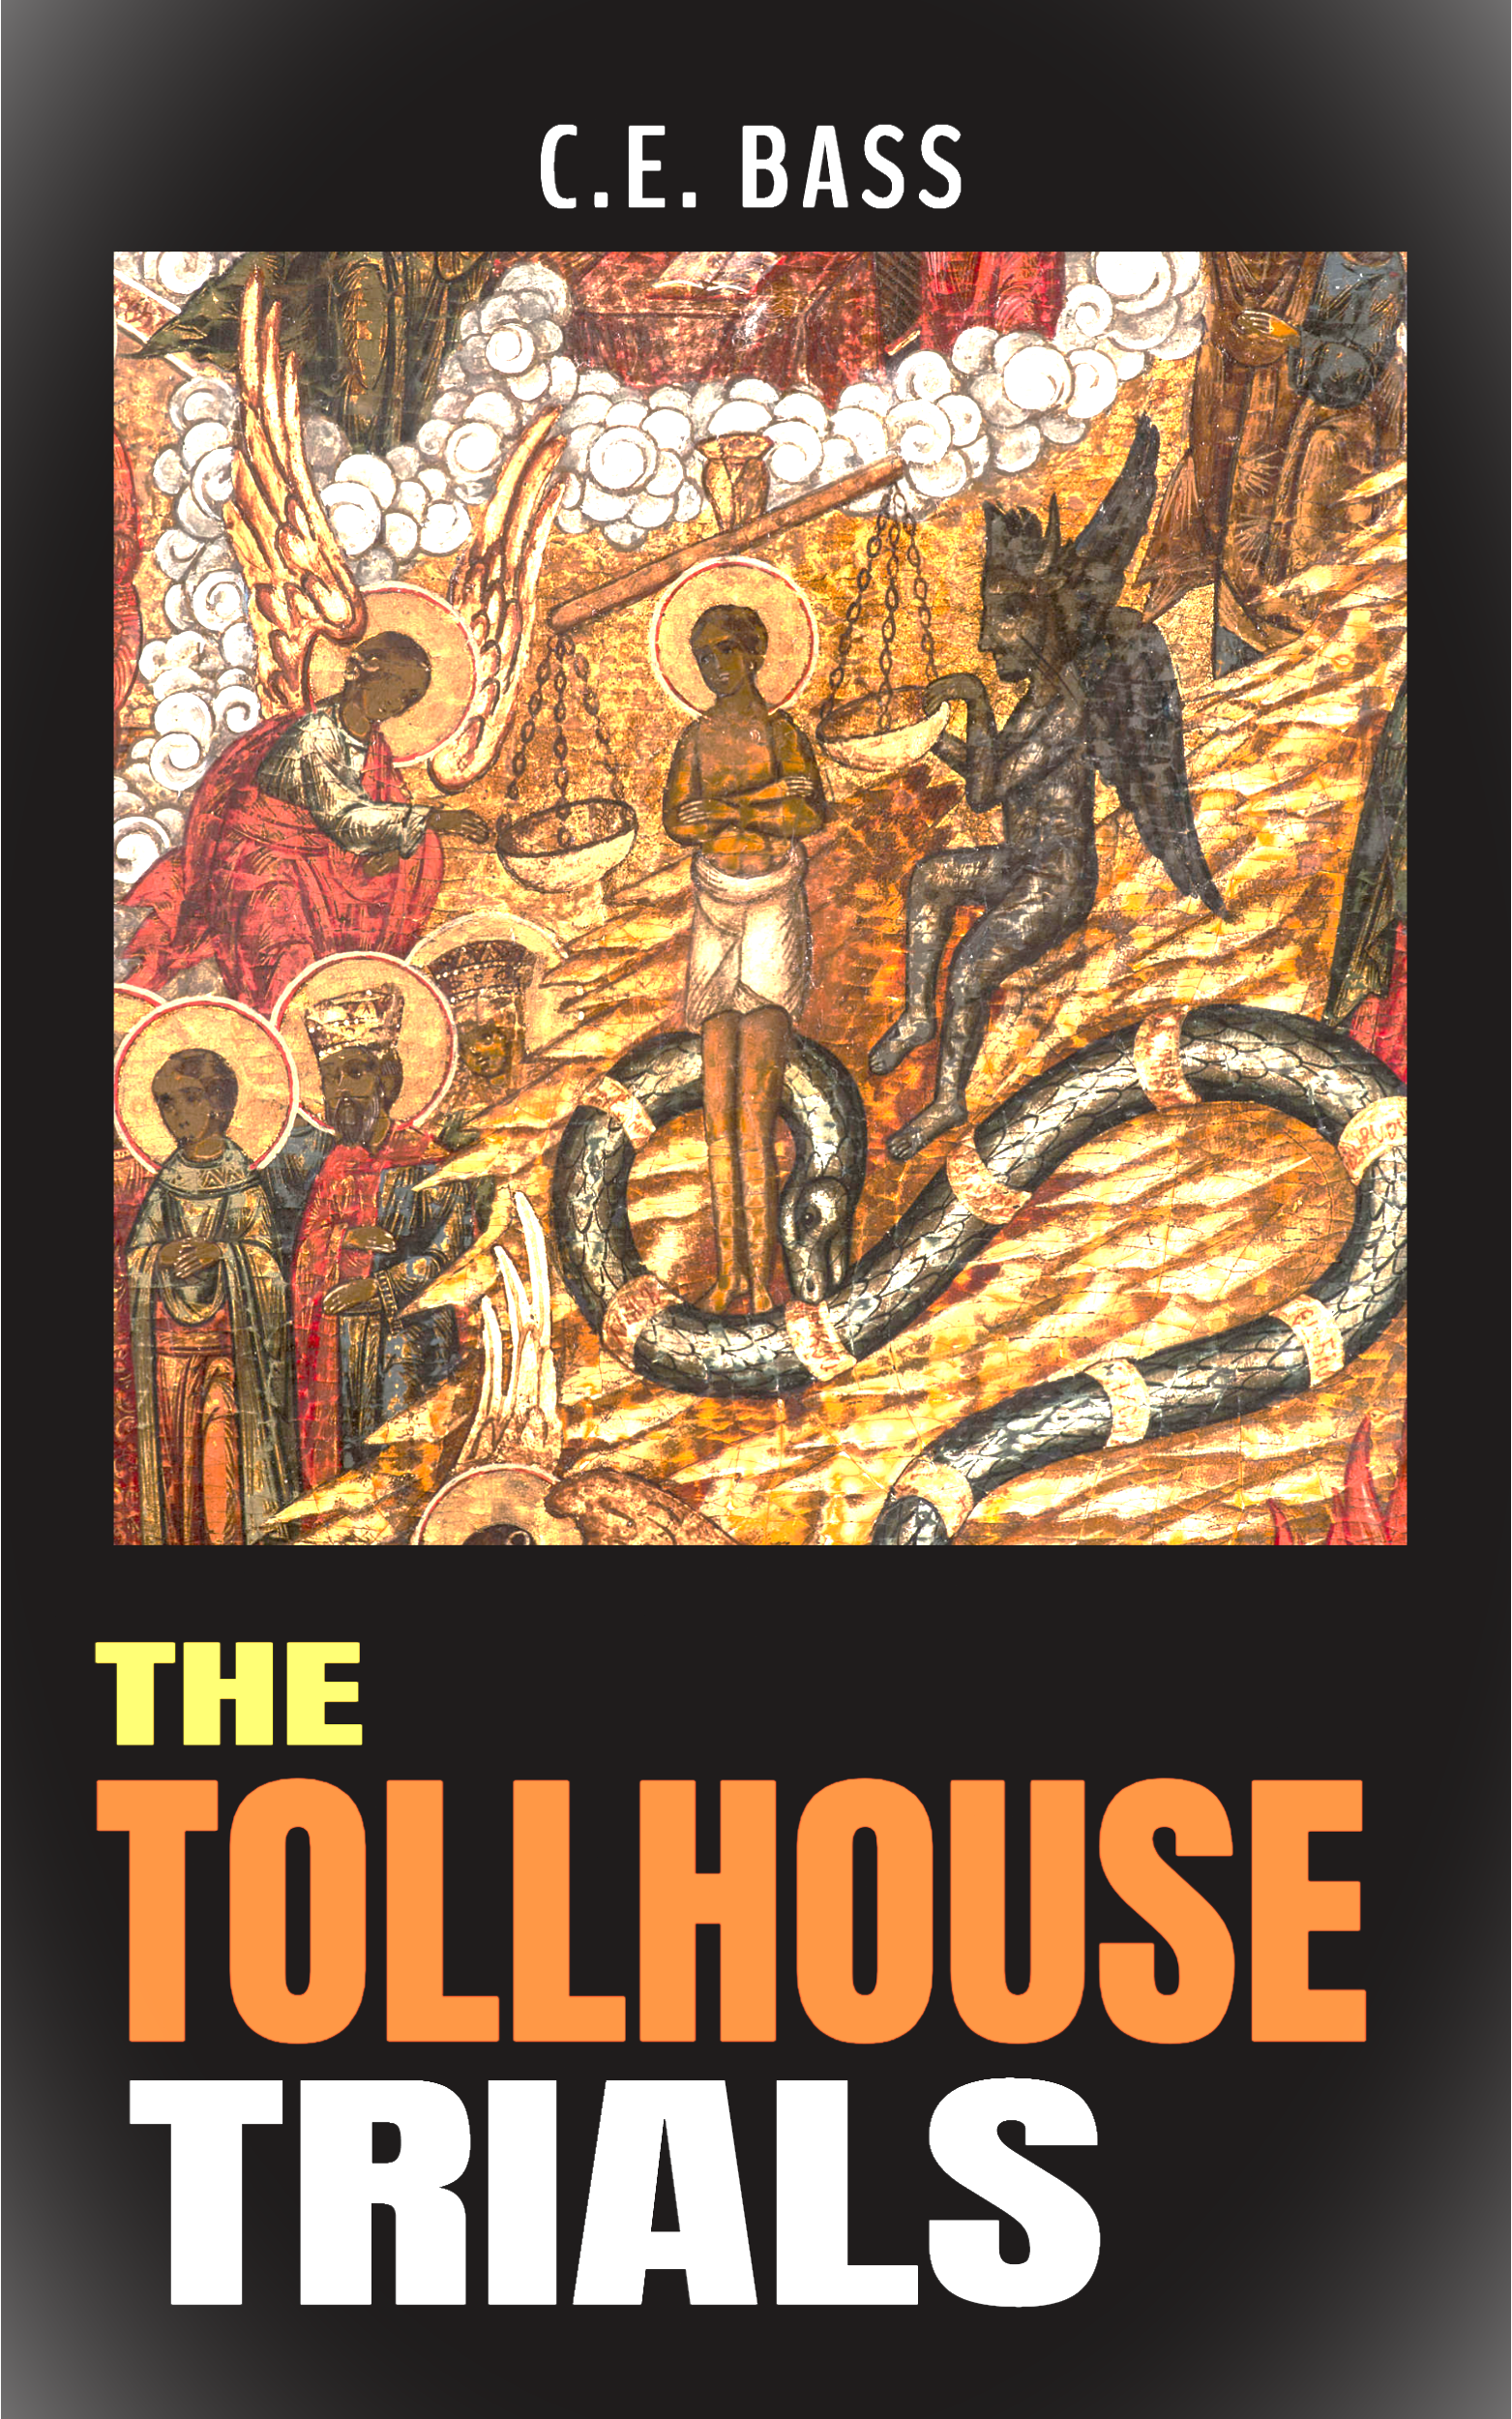 FREE: The Tollhouse Trials by C.E. Bass